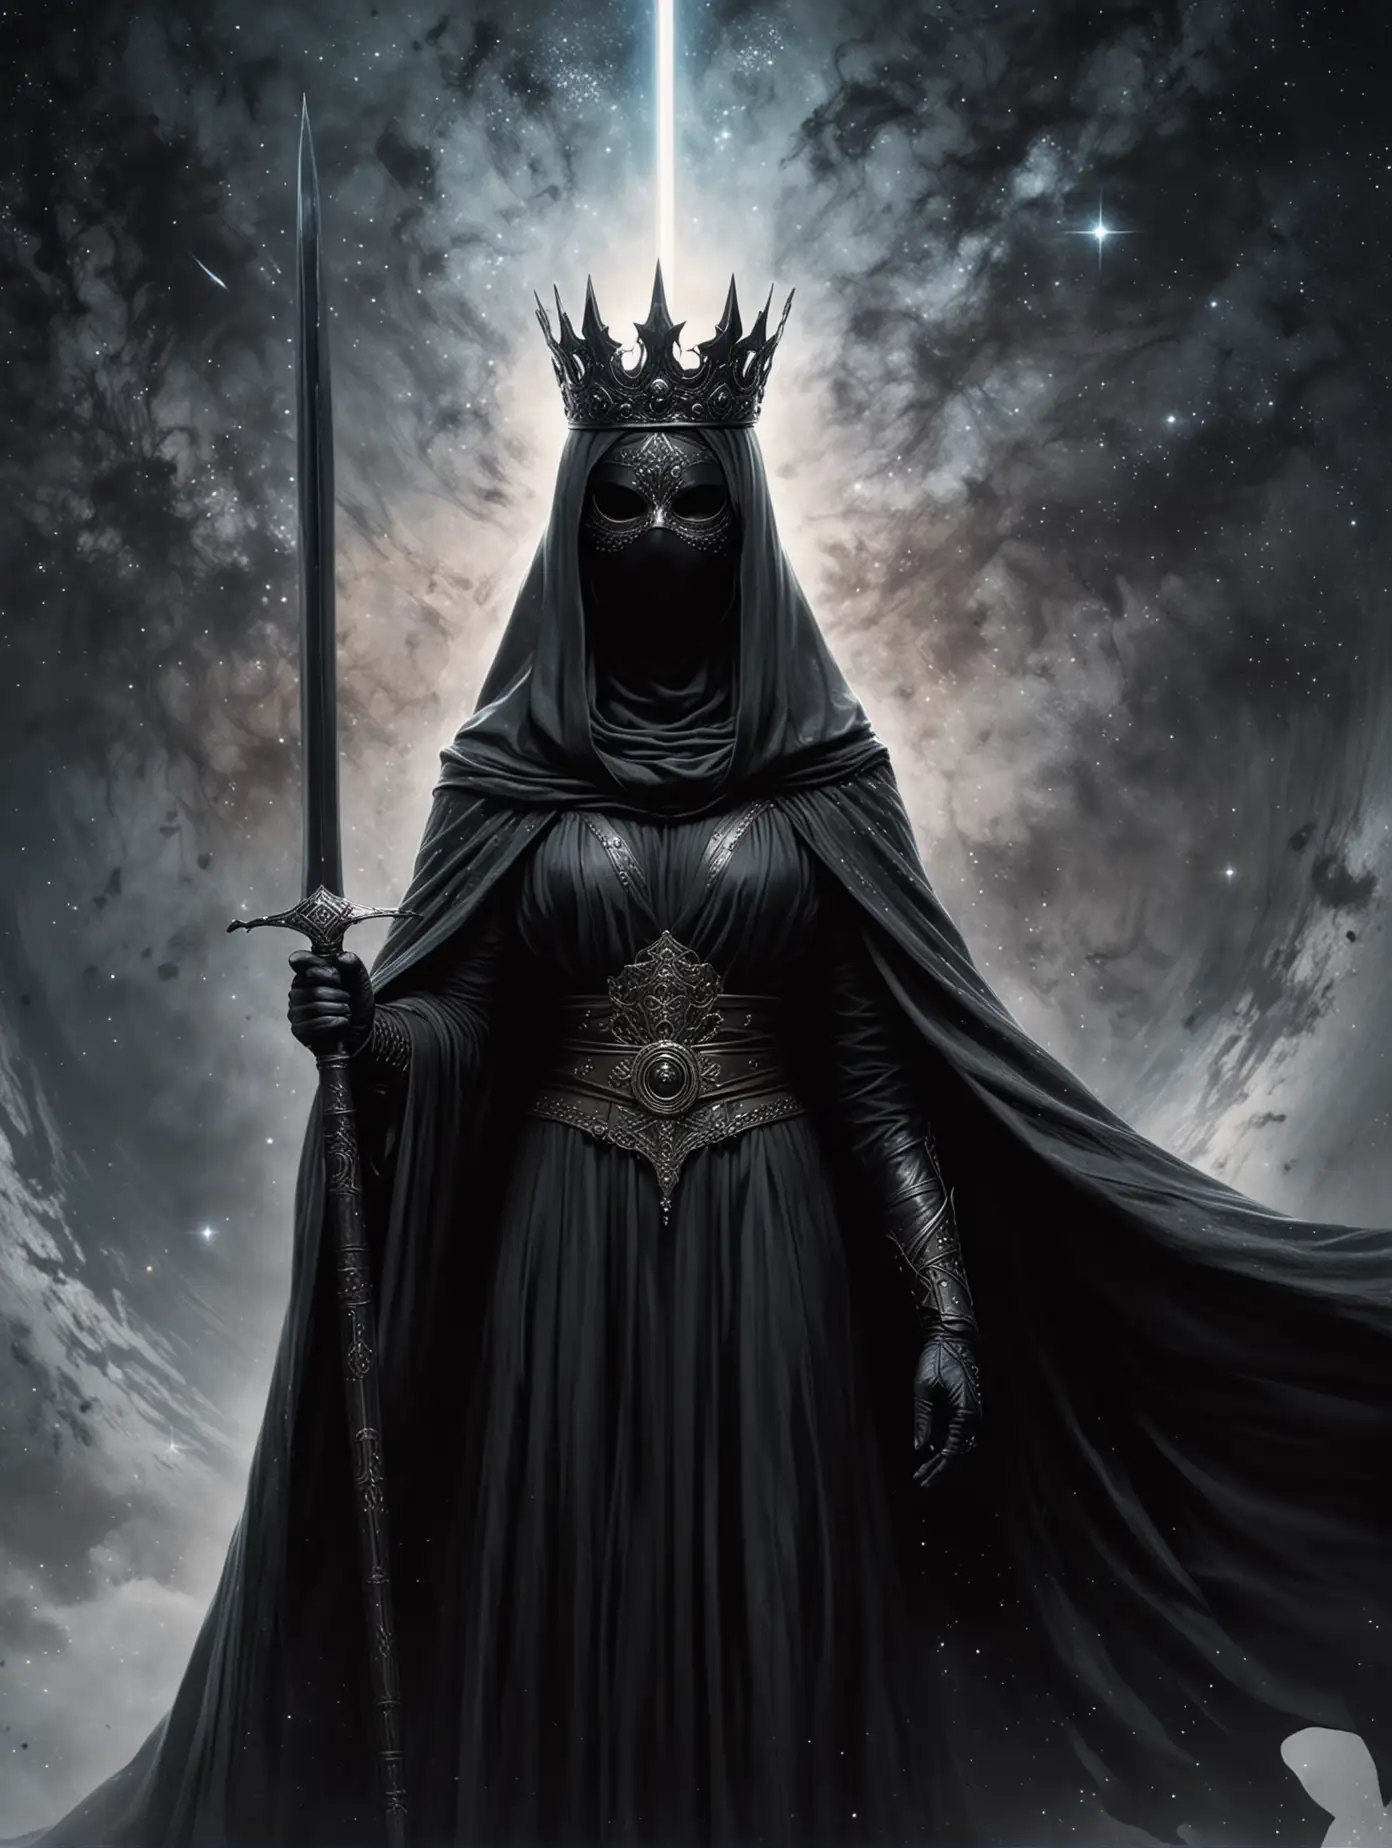 Sister-Geserit-Stands-Tall-on-the-Edge-of-a-Cosmic-Abyss-with-Black-Hole-Disc-and-Sword